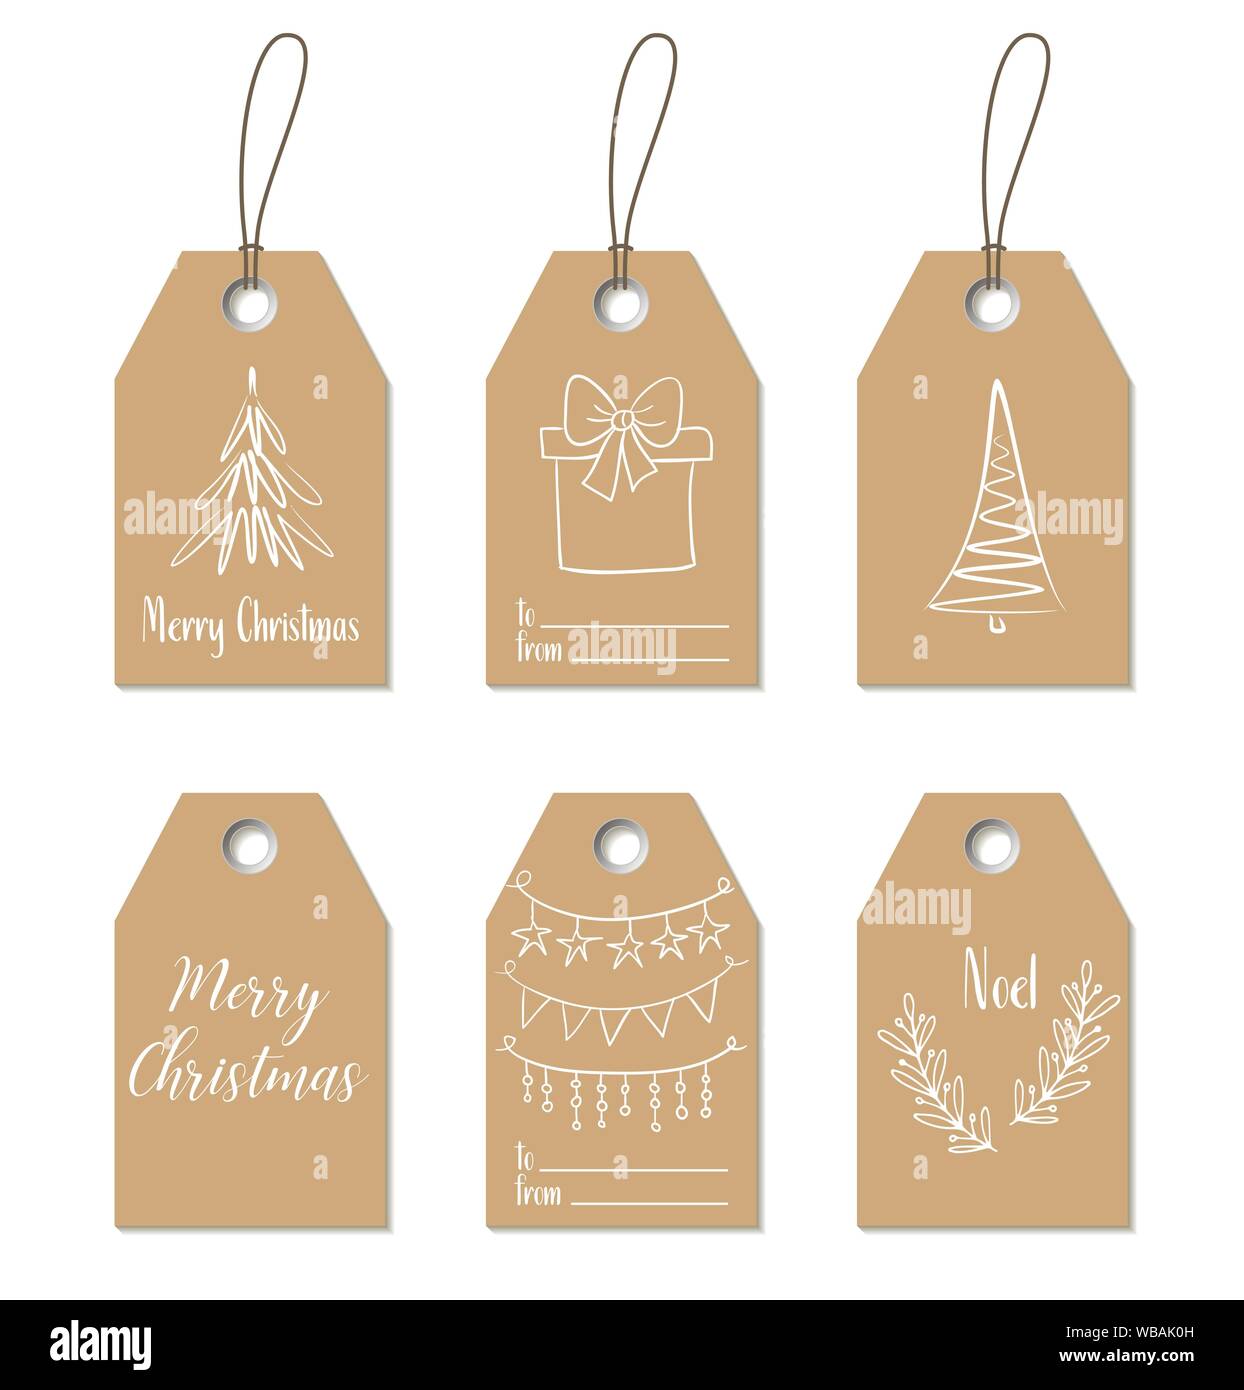 Christmas gift tags. Hand drawn craft labels Stock Vector